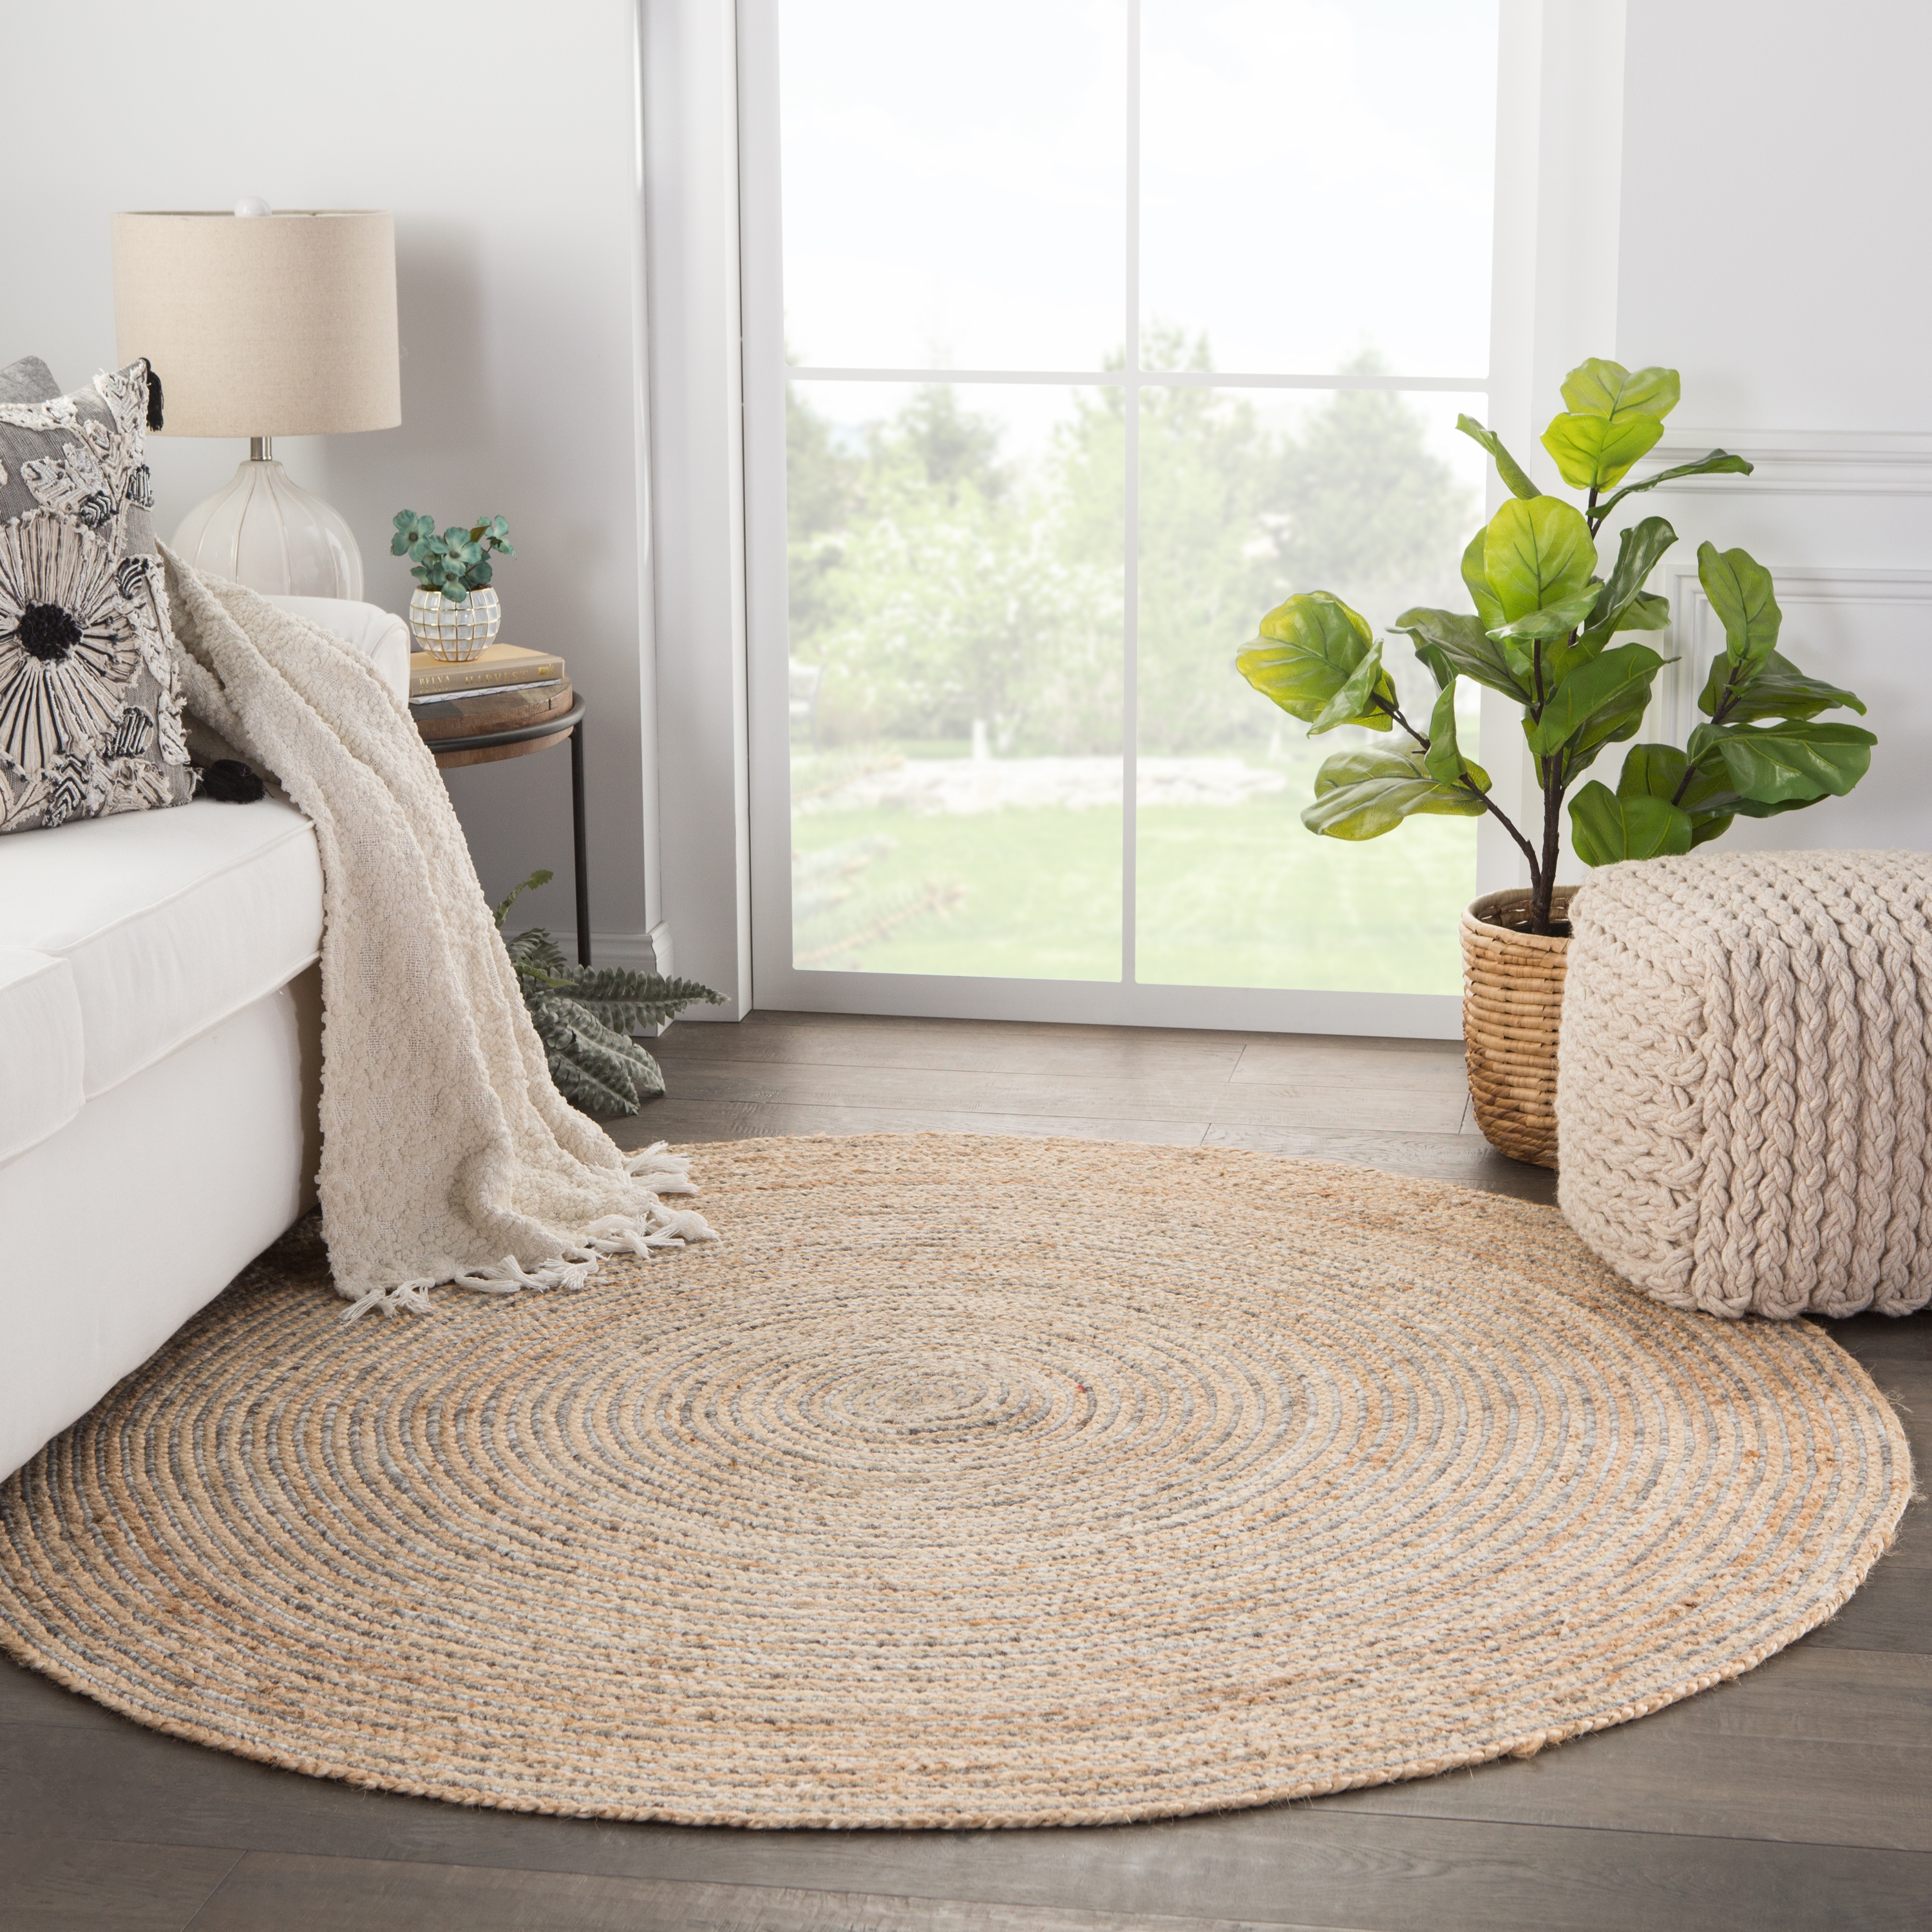 Hastings Natural Solid Beige/ Gray Round Area Rug (8'X8') - Image 3